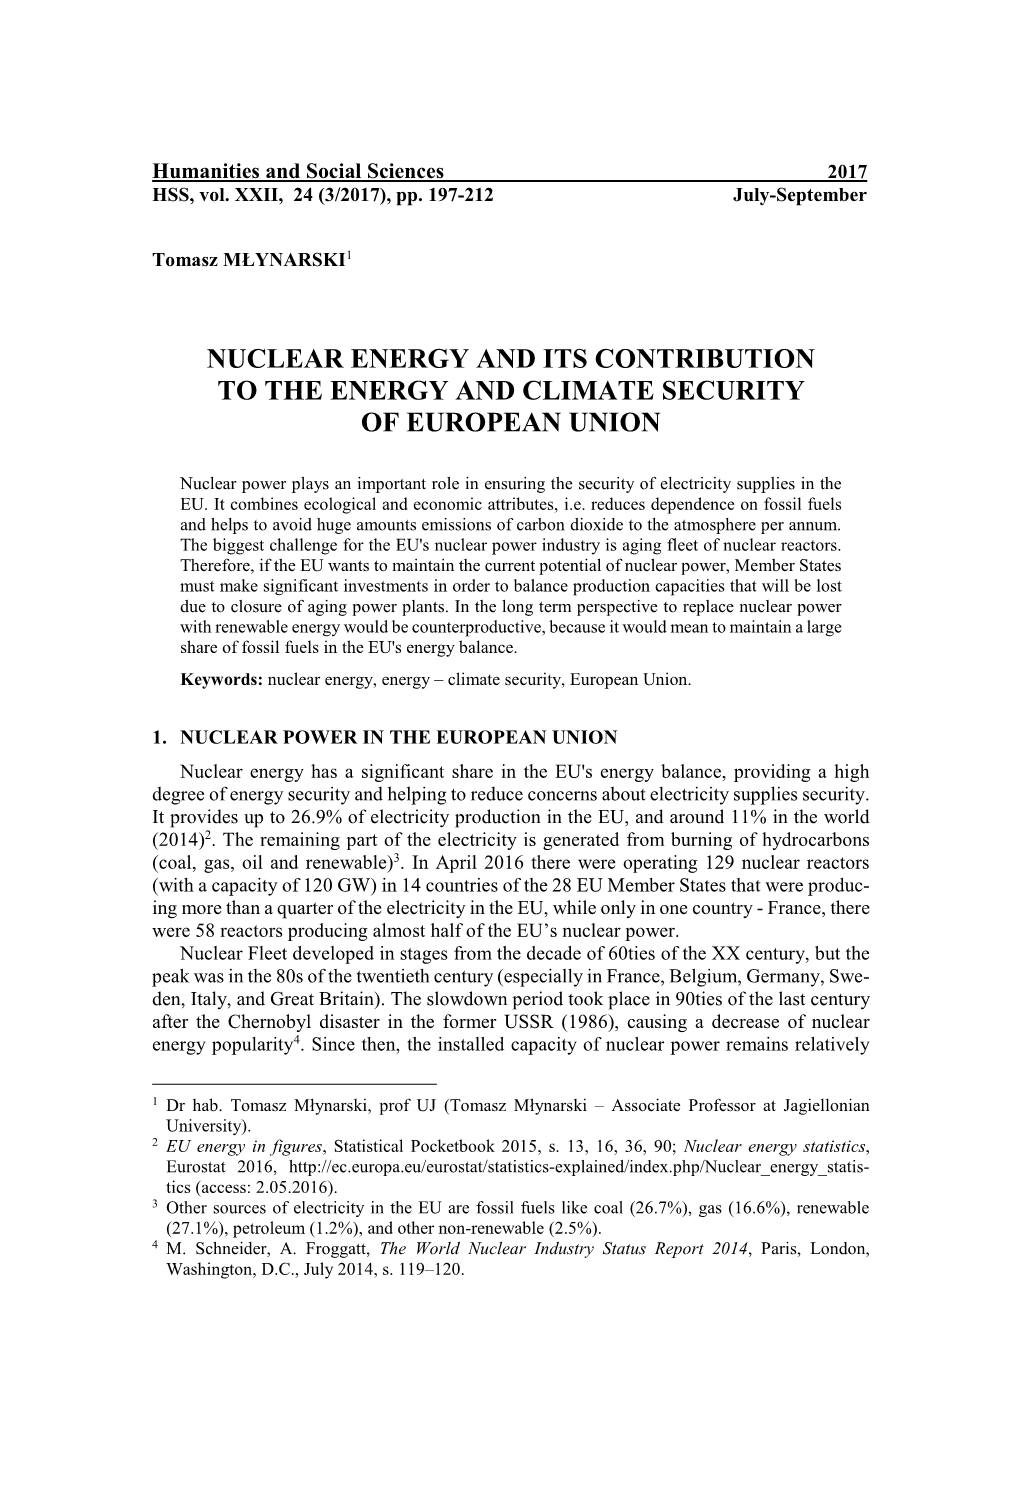 Nuclear Energy and Its Contribution to the Energy and Climate Security of European Union